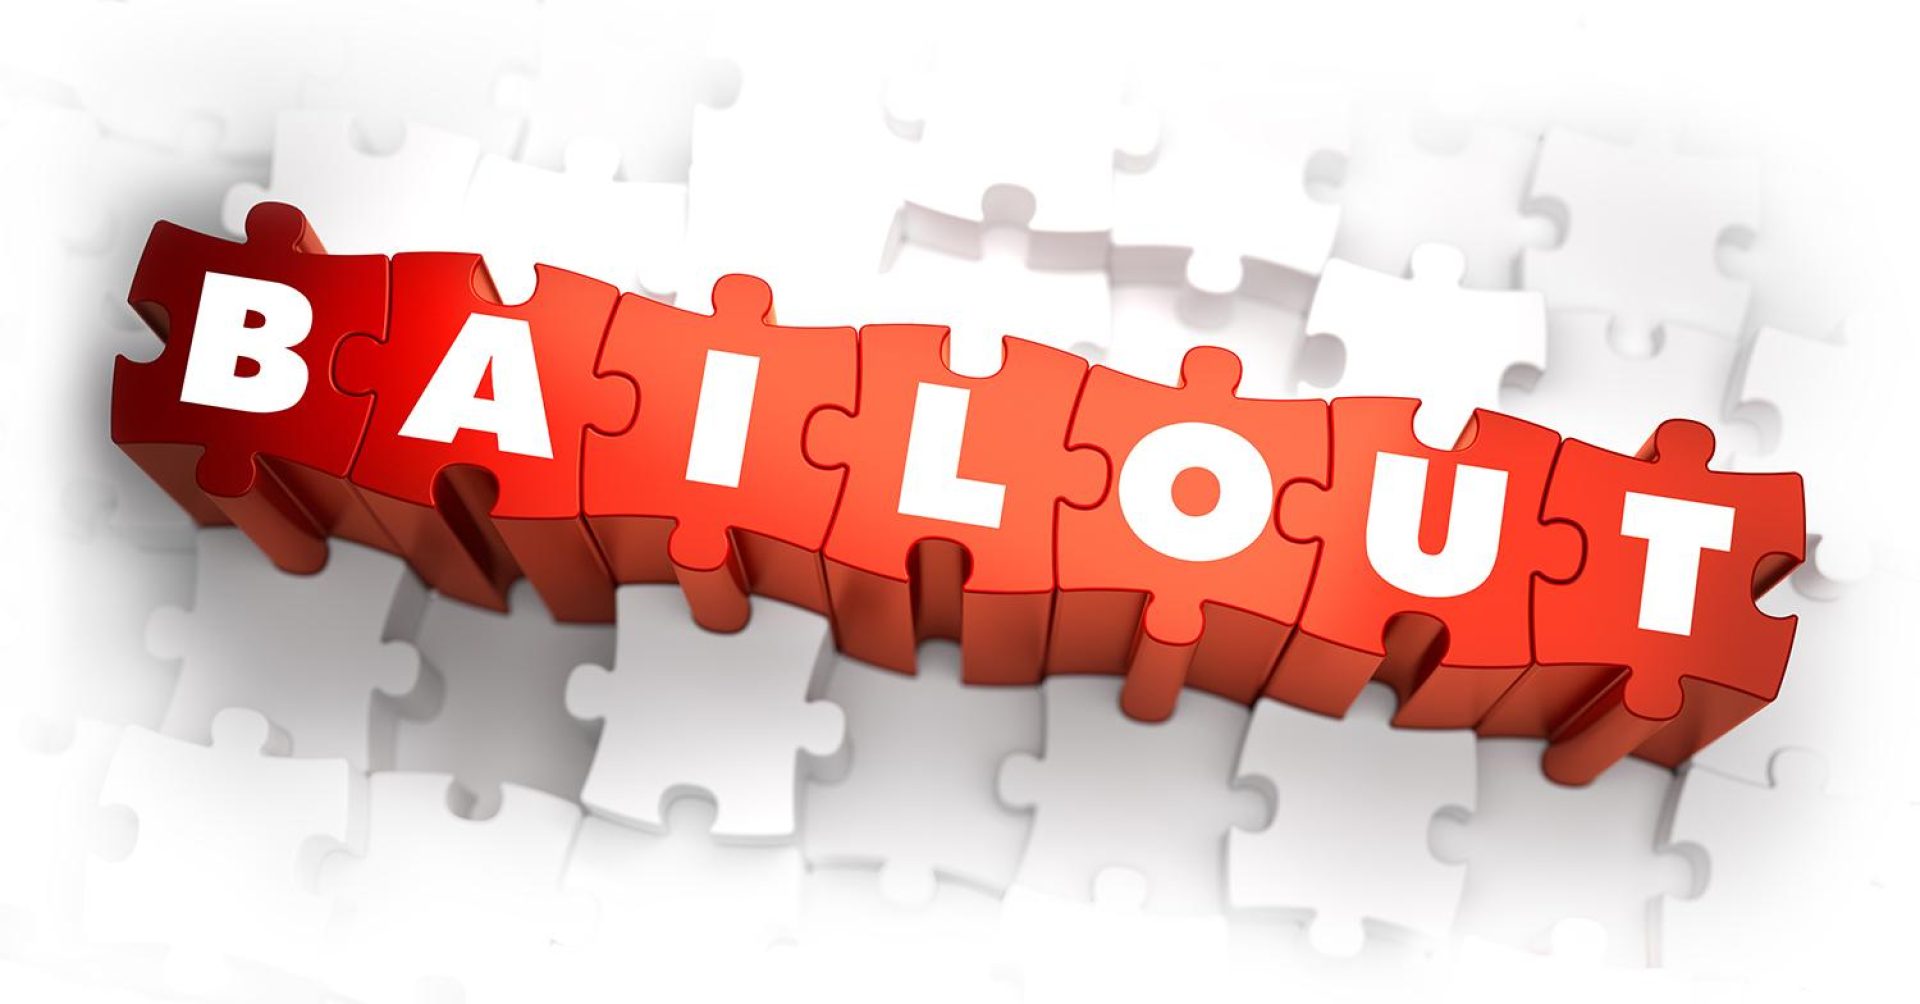 Bailout - White Word on Red Puzzles on White Background. 3D Illustration.